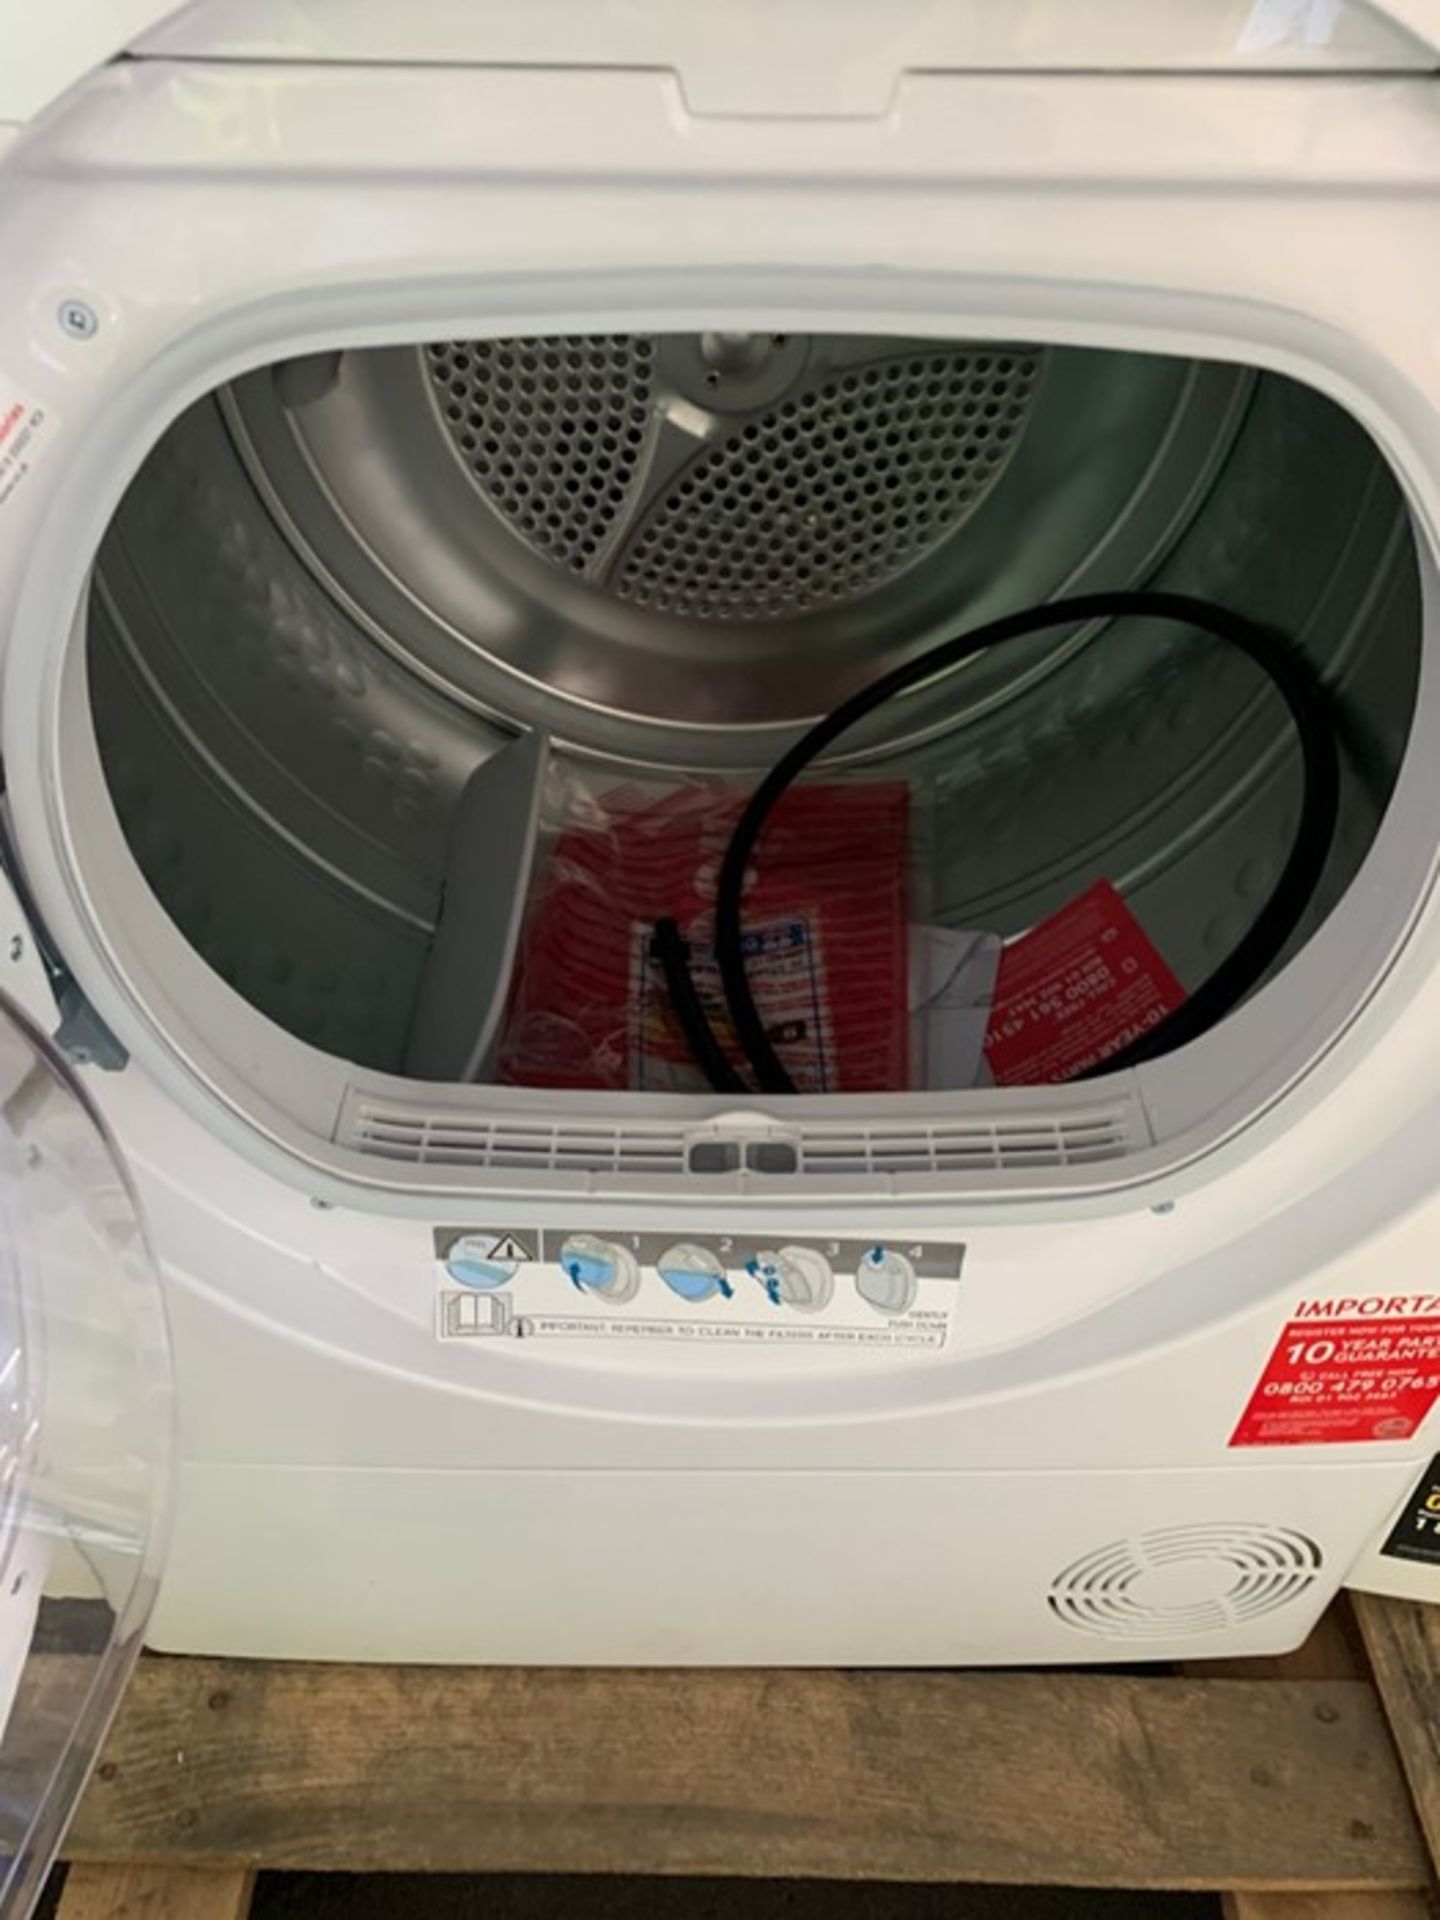 HOOVER DXC9TCE FREESTANDING CONDENSER TUMBLE DRYER, 9KG LOAD - Image 2 of 3